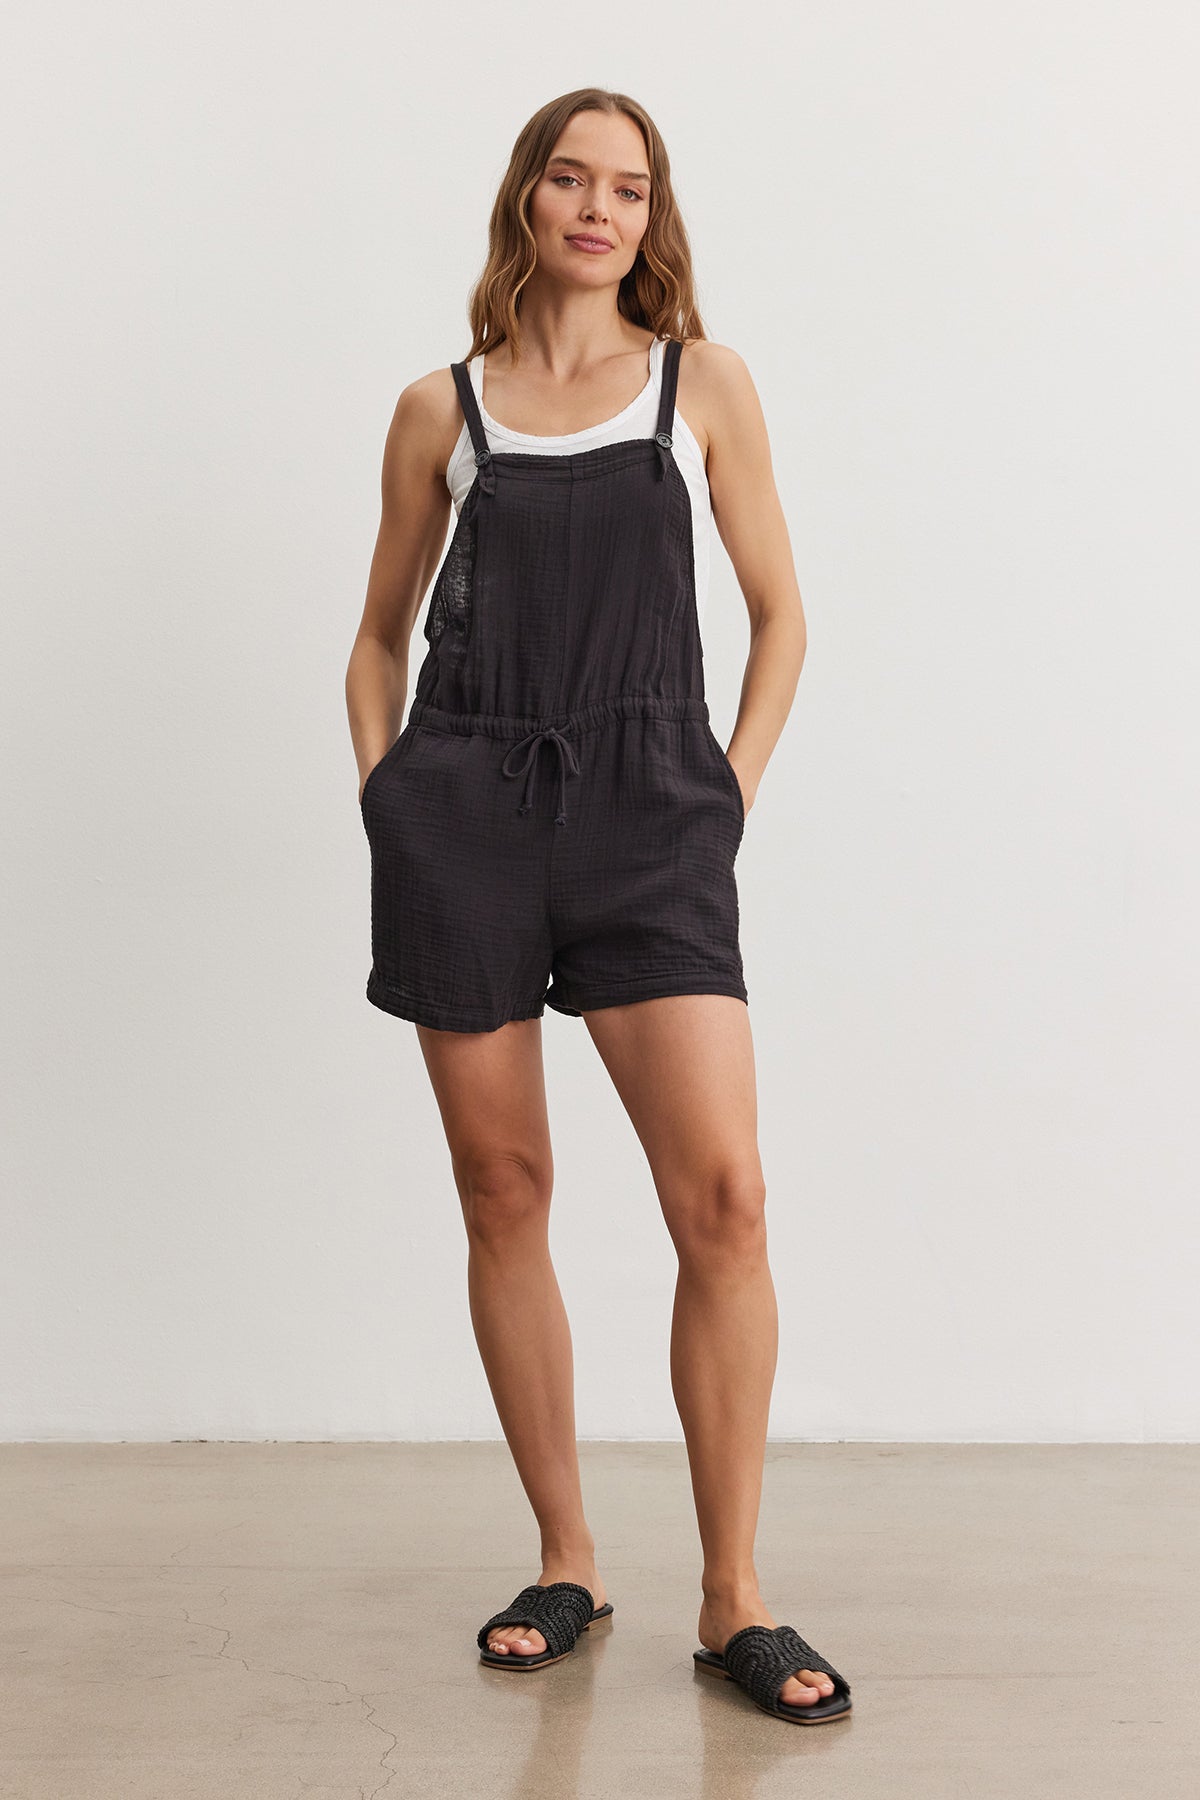 A woman stands in a studio, wearing a black CYNDEE COTTON GAUZE ROMPER by Velvet by Graham & Spencer with drawstring waist and black slide sandals, smiling subtly.-36909553451201